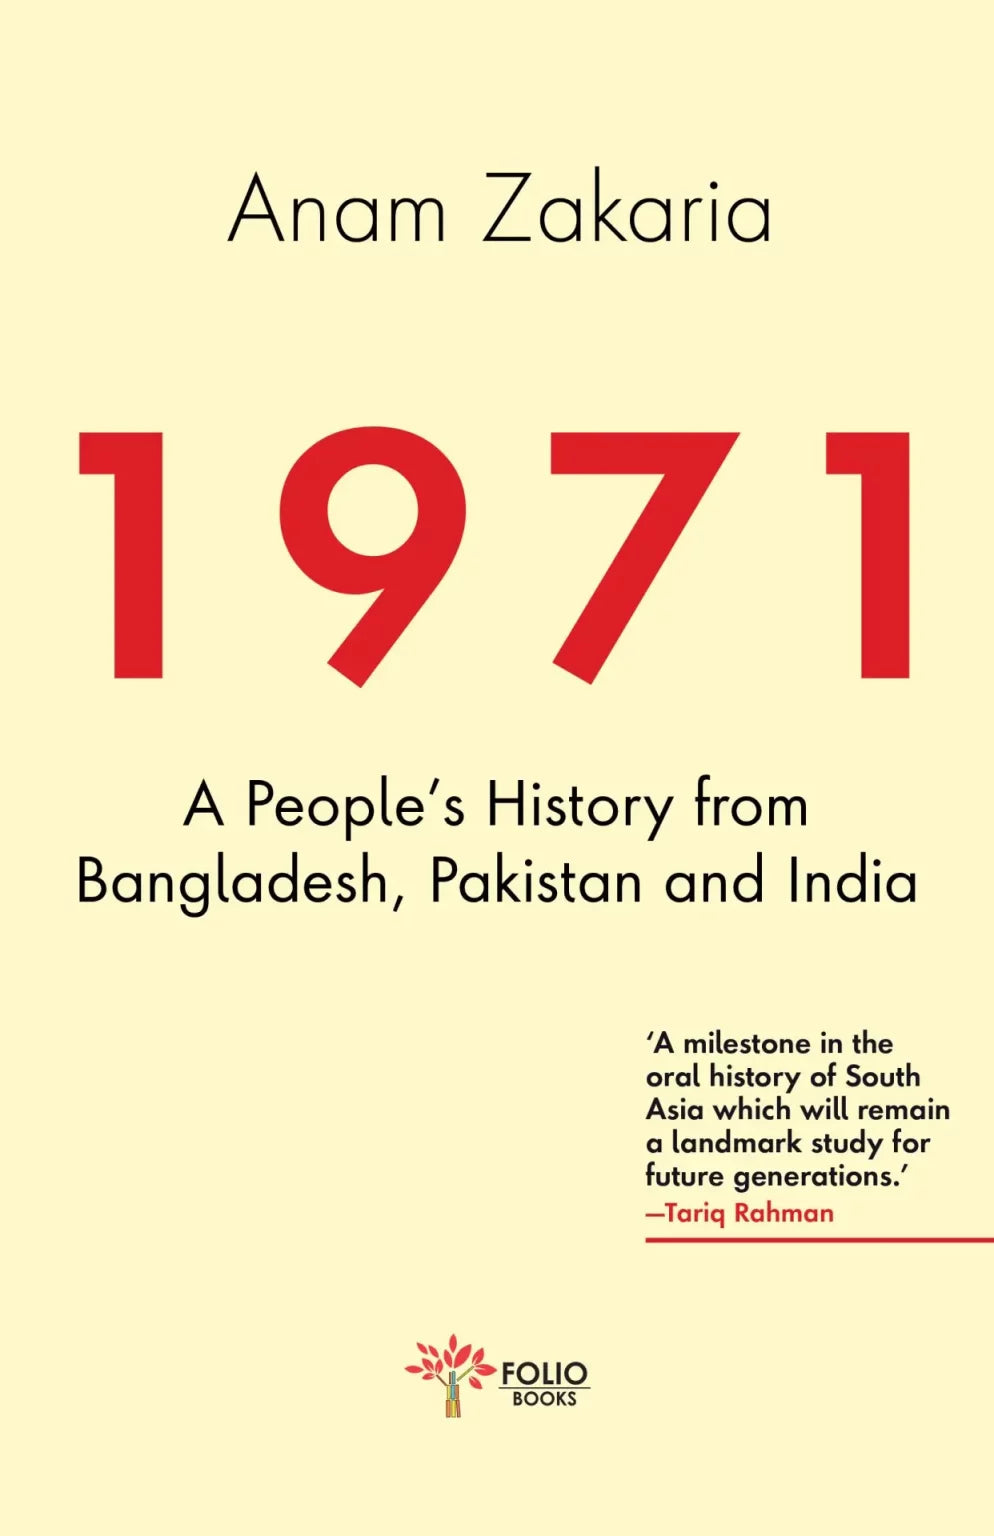 1971 A People's History From Bangladesh, Pakistan and India